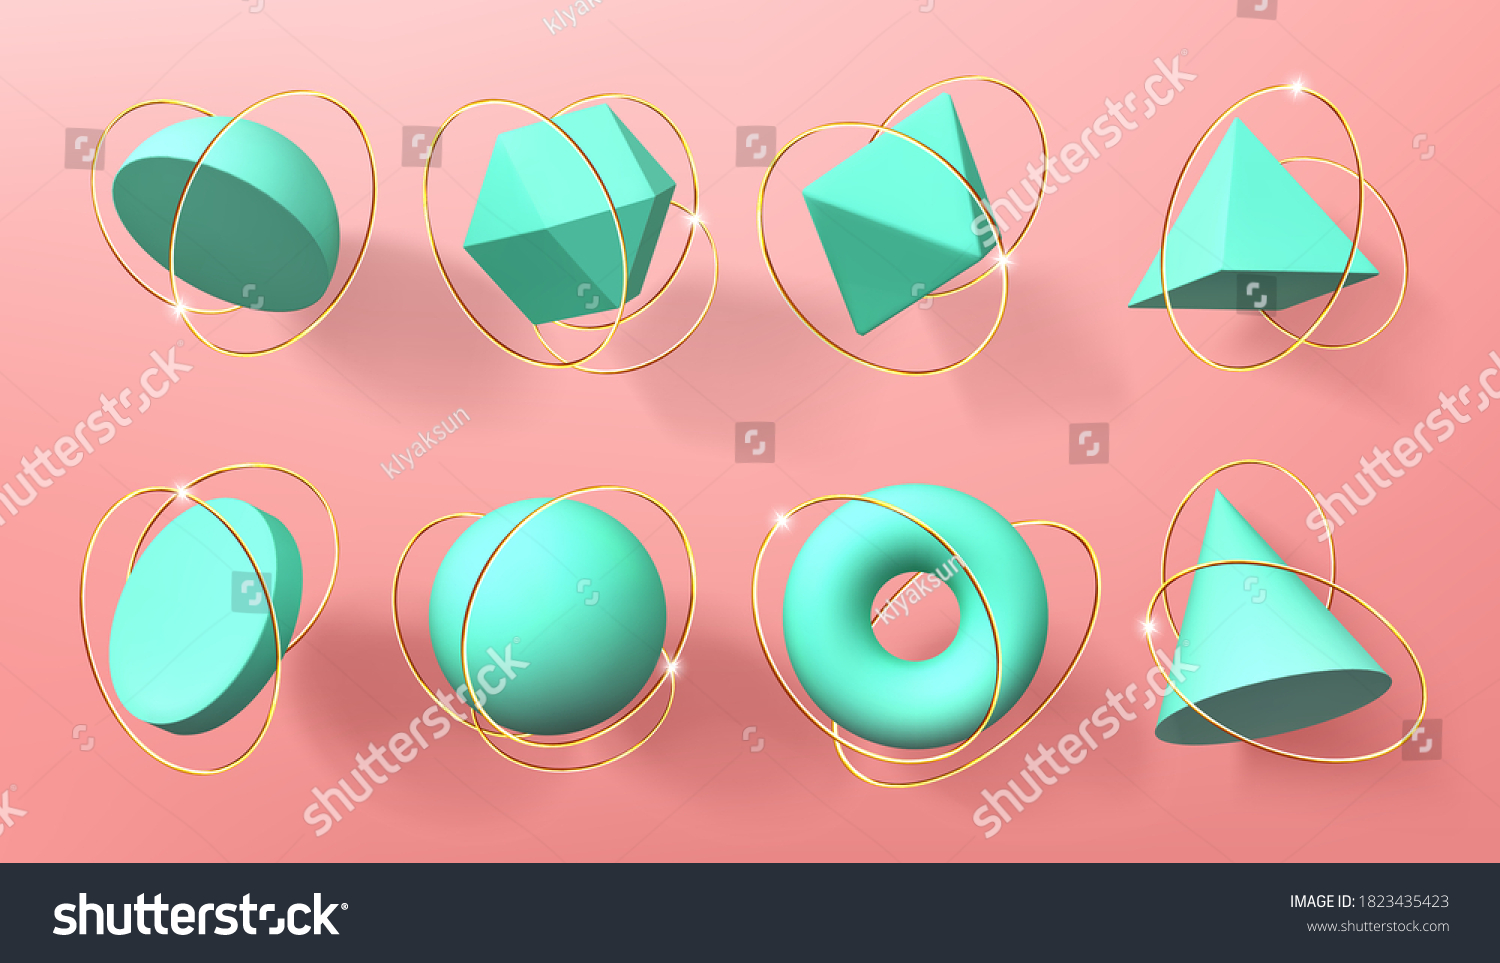 Turquoise 3d geometric shapes with golden rings. Vector realistic set of abstract render figures, sphere, cone, pyramid, octahedron and torus. Volumetric geometry forms isolated on pink background #1823435423